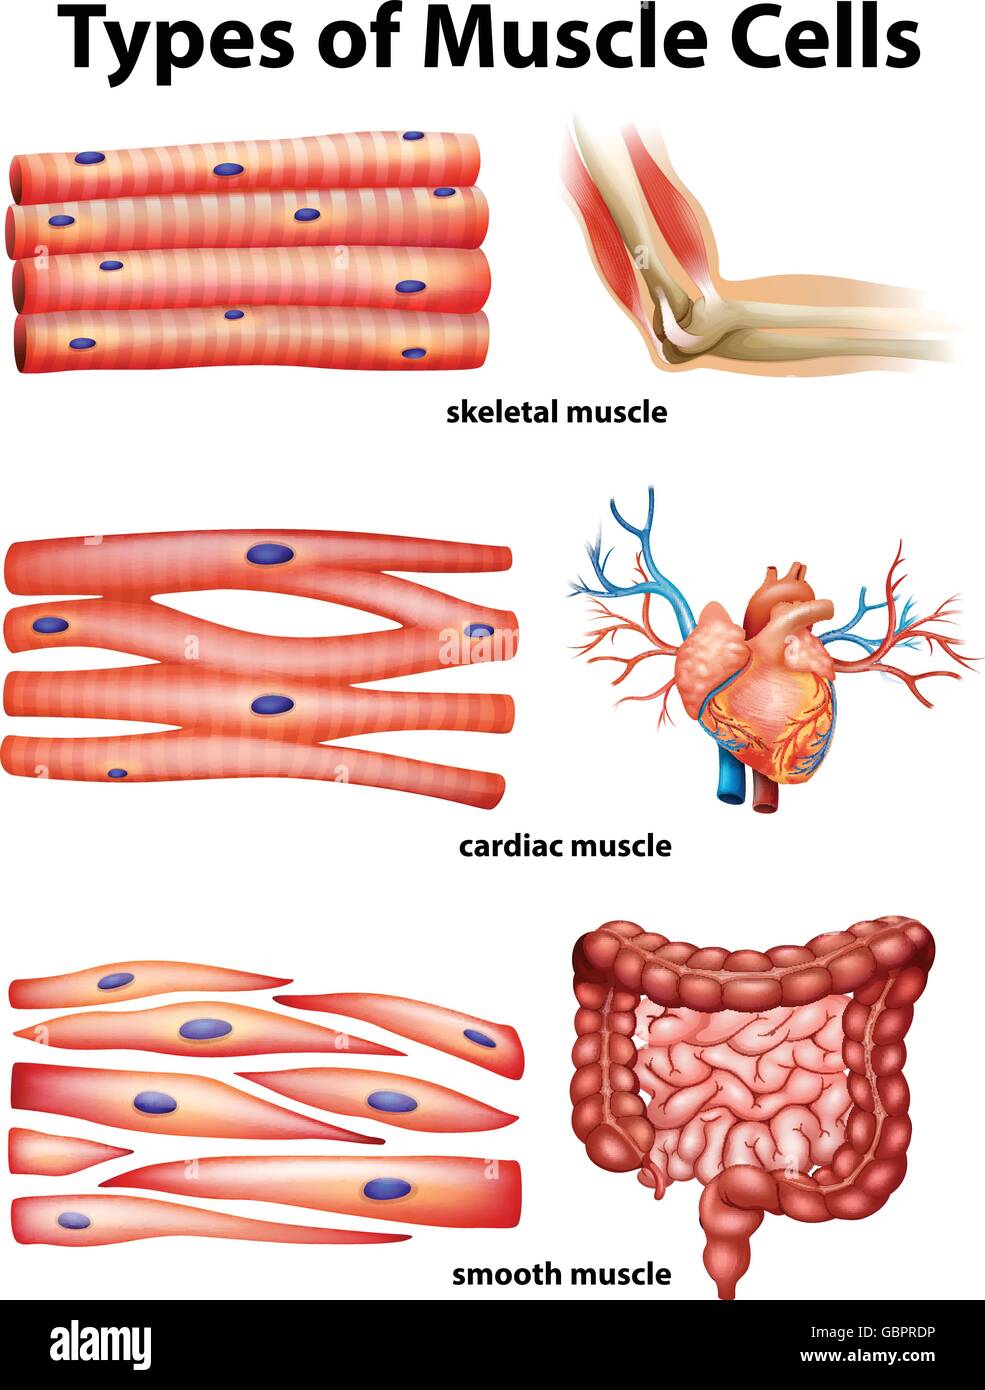 Smooth muscle tissue Cut Out Stock Images & Pictures - Page 3 - Alamy